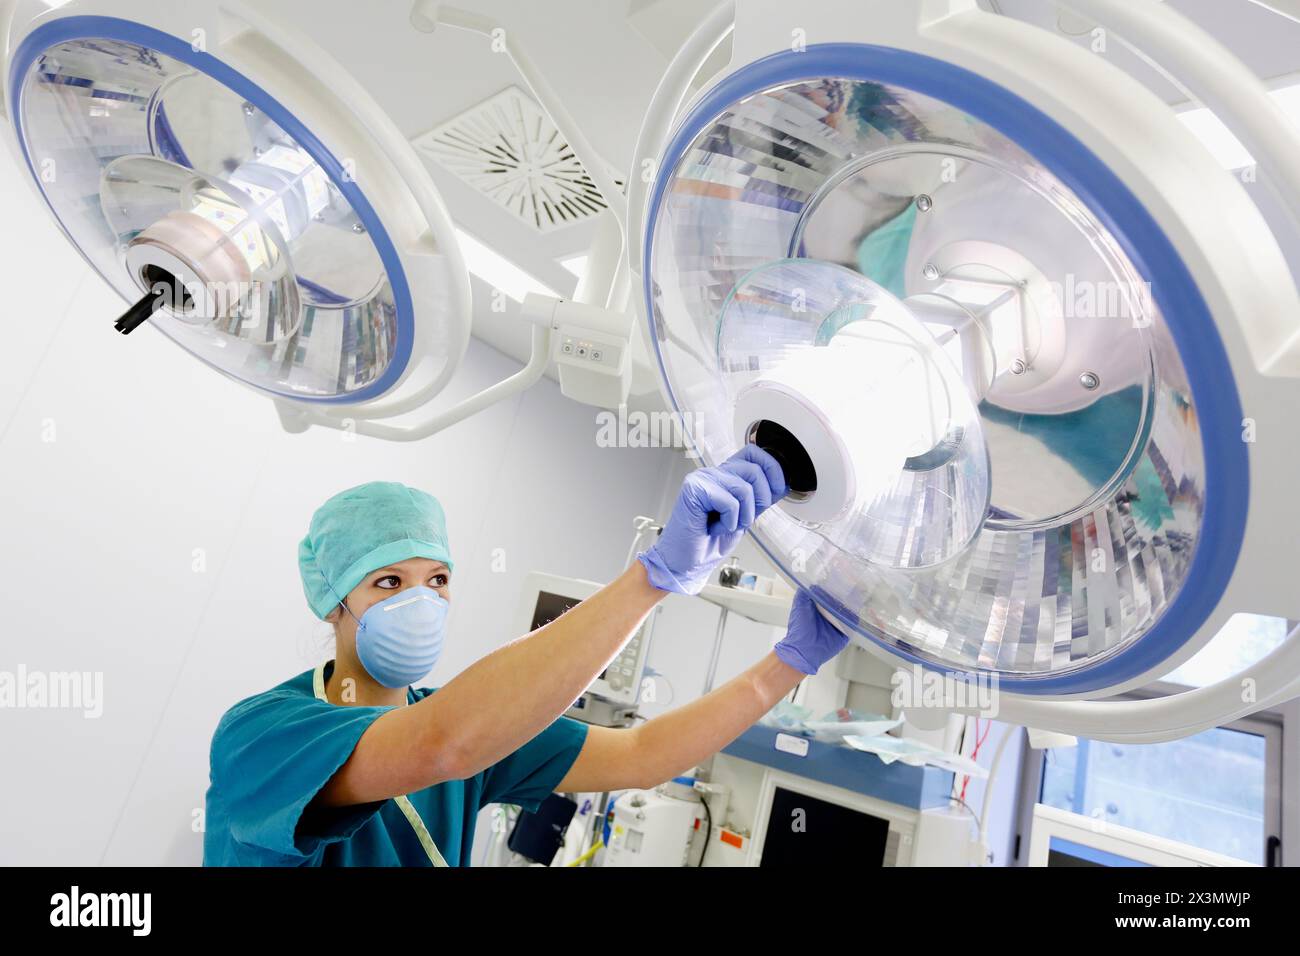 Surgery, Operating room, Onkologikoa Hospital, Oncology Institute, Case Center for prevention, diagnosis and treatment of cancer, Donostia, San Sebast Stock Photo